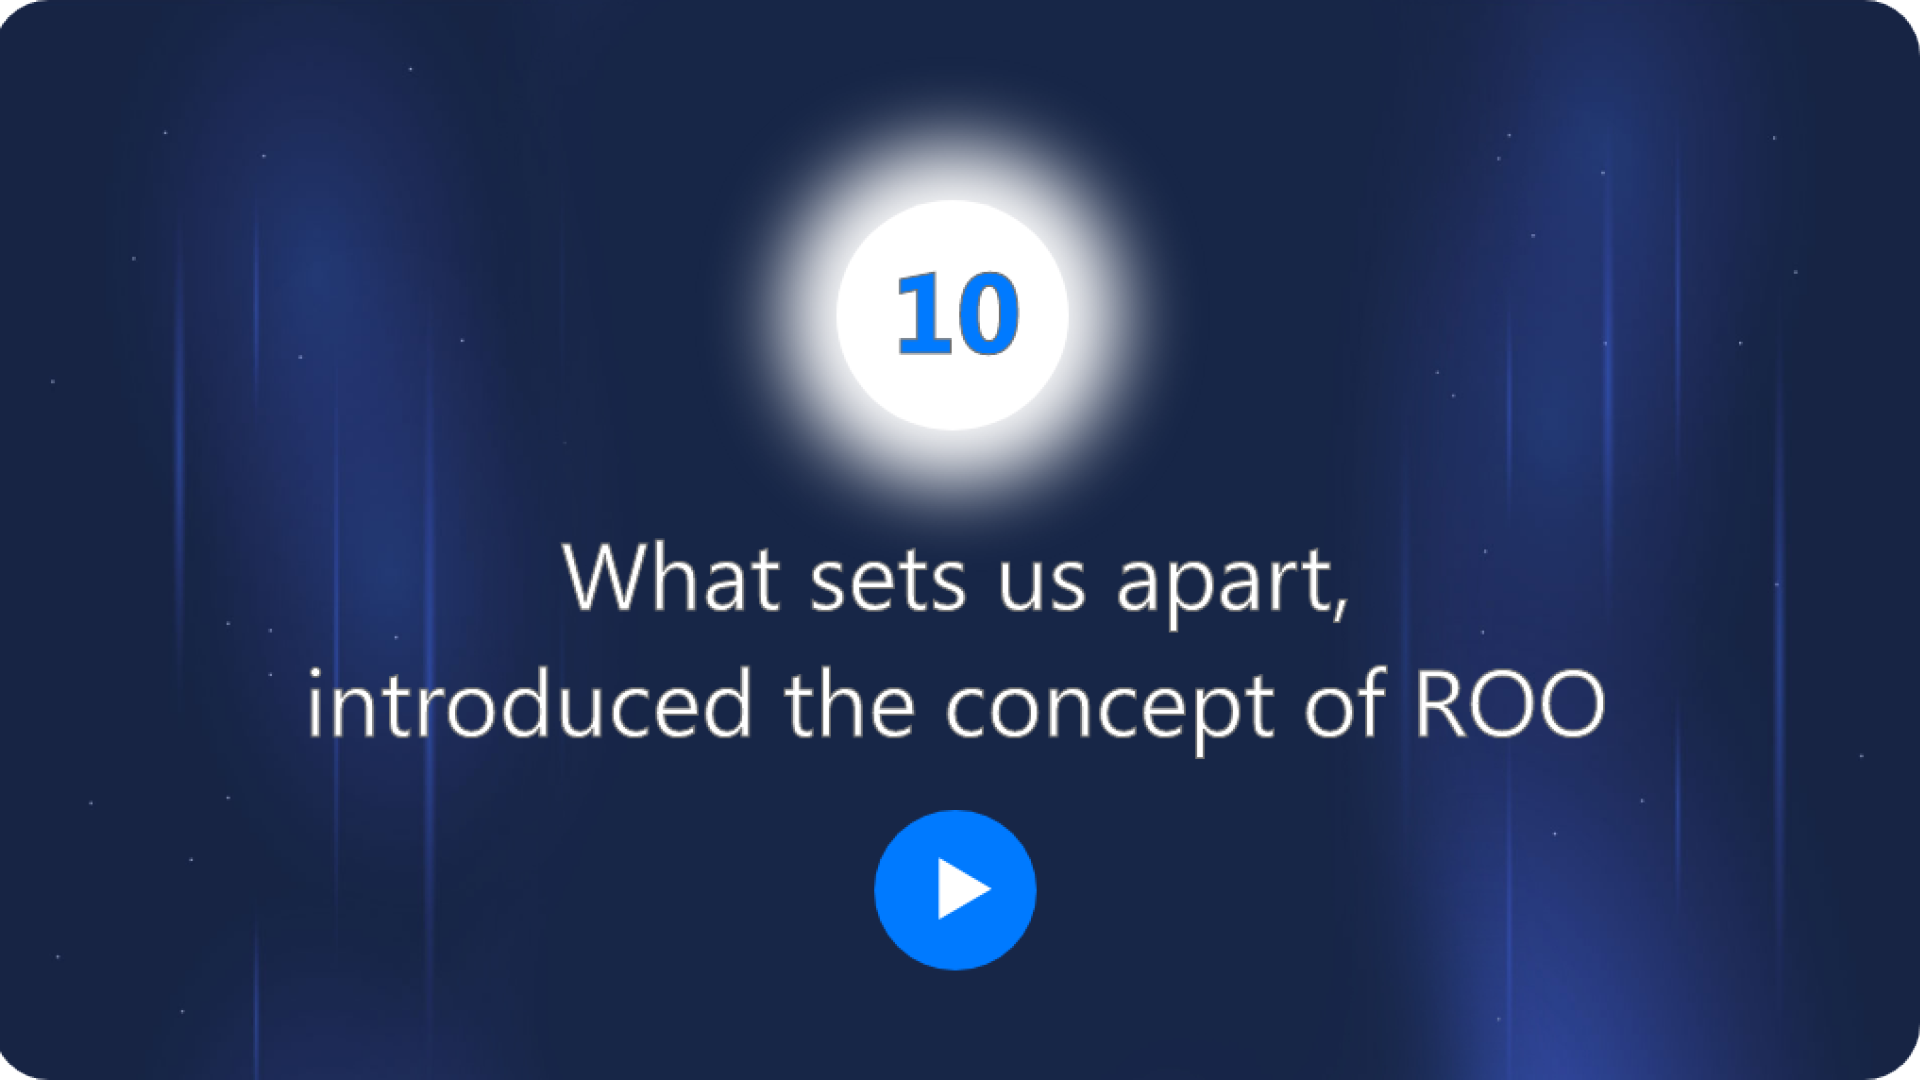 What sets us apart, introduced the concept of ROO